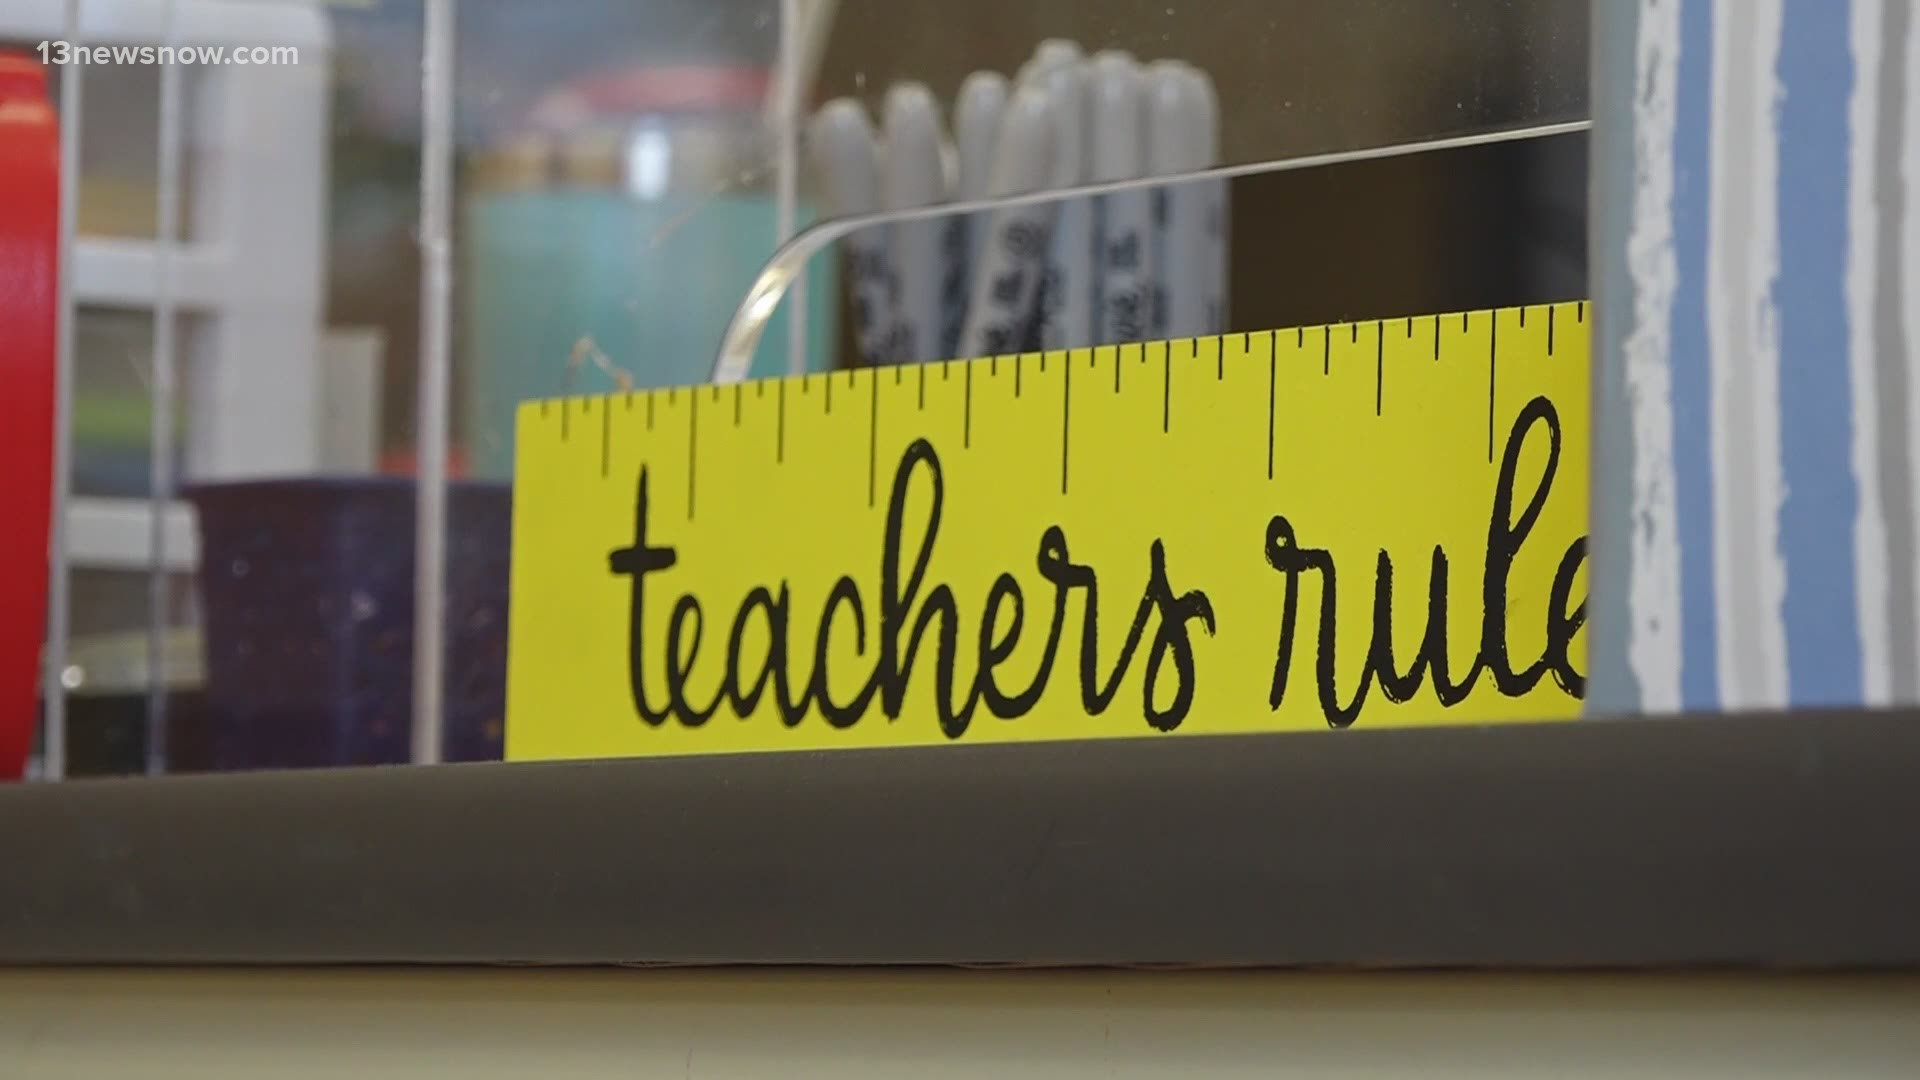 Most new teachers in Hampton Roads will start out with $47,000 salaries. Norfolk's teachers will see a 6.1% raise next year, making one of the largest jumps locally.